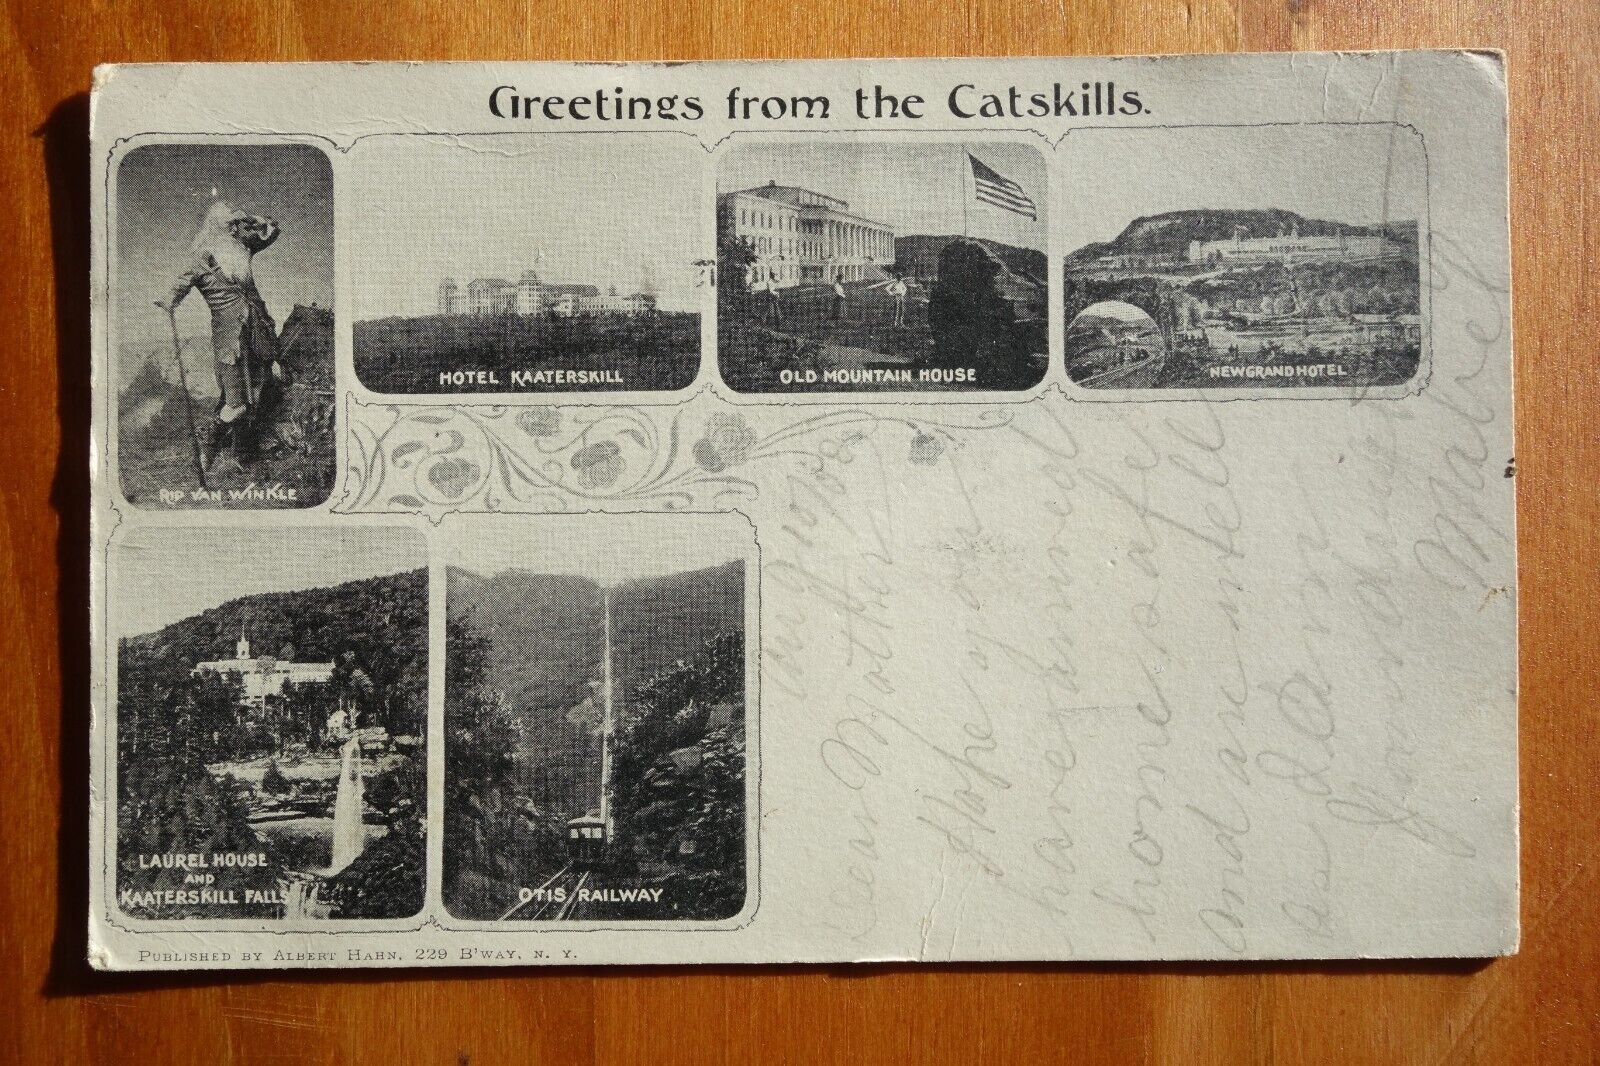 early Greetings from the Catskills, multiview postcard pmk 1903 Otis Railway